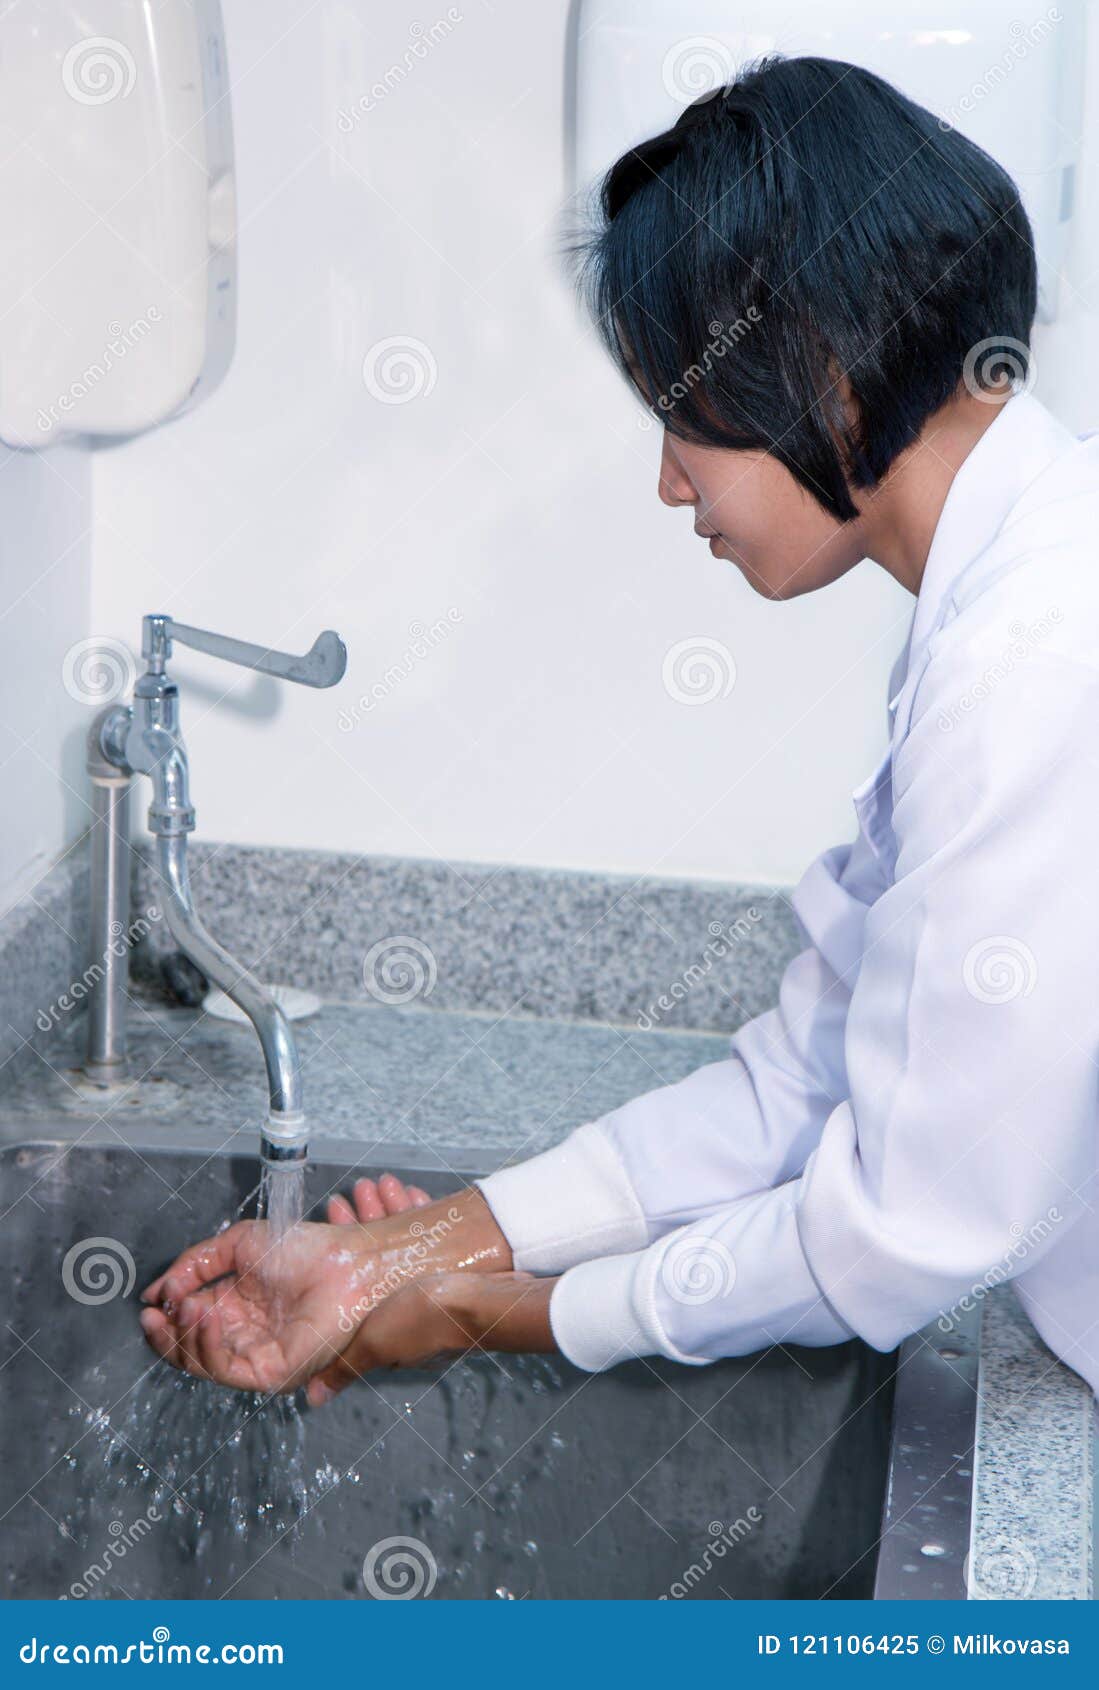 Woman In A Laboratory Washing Her Hands Stock Image Image